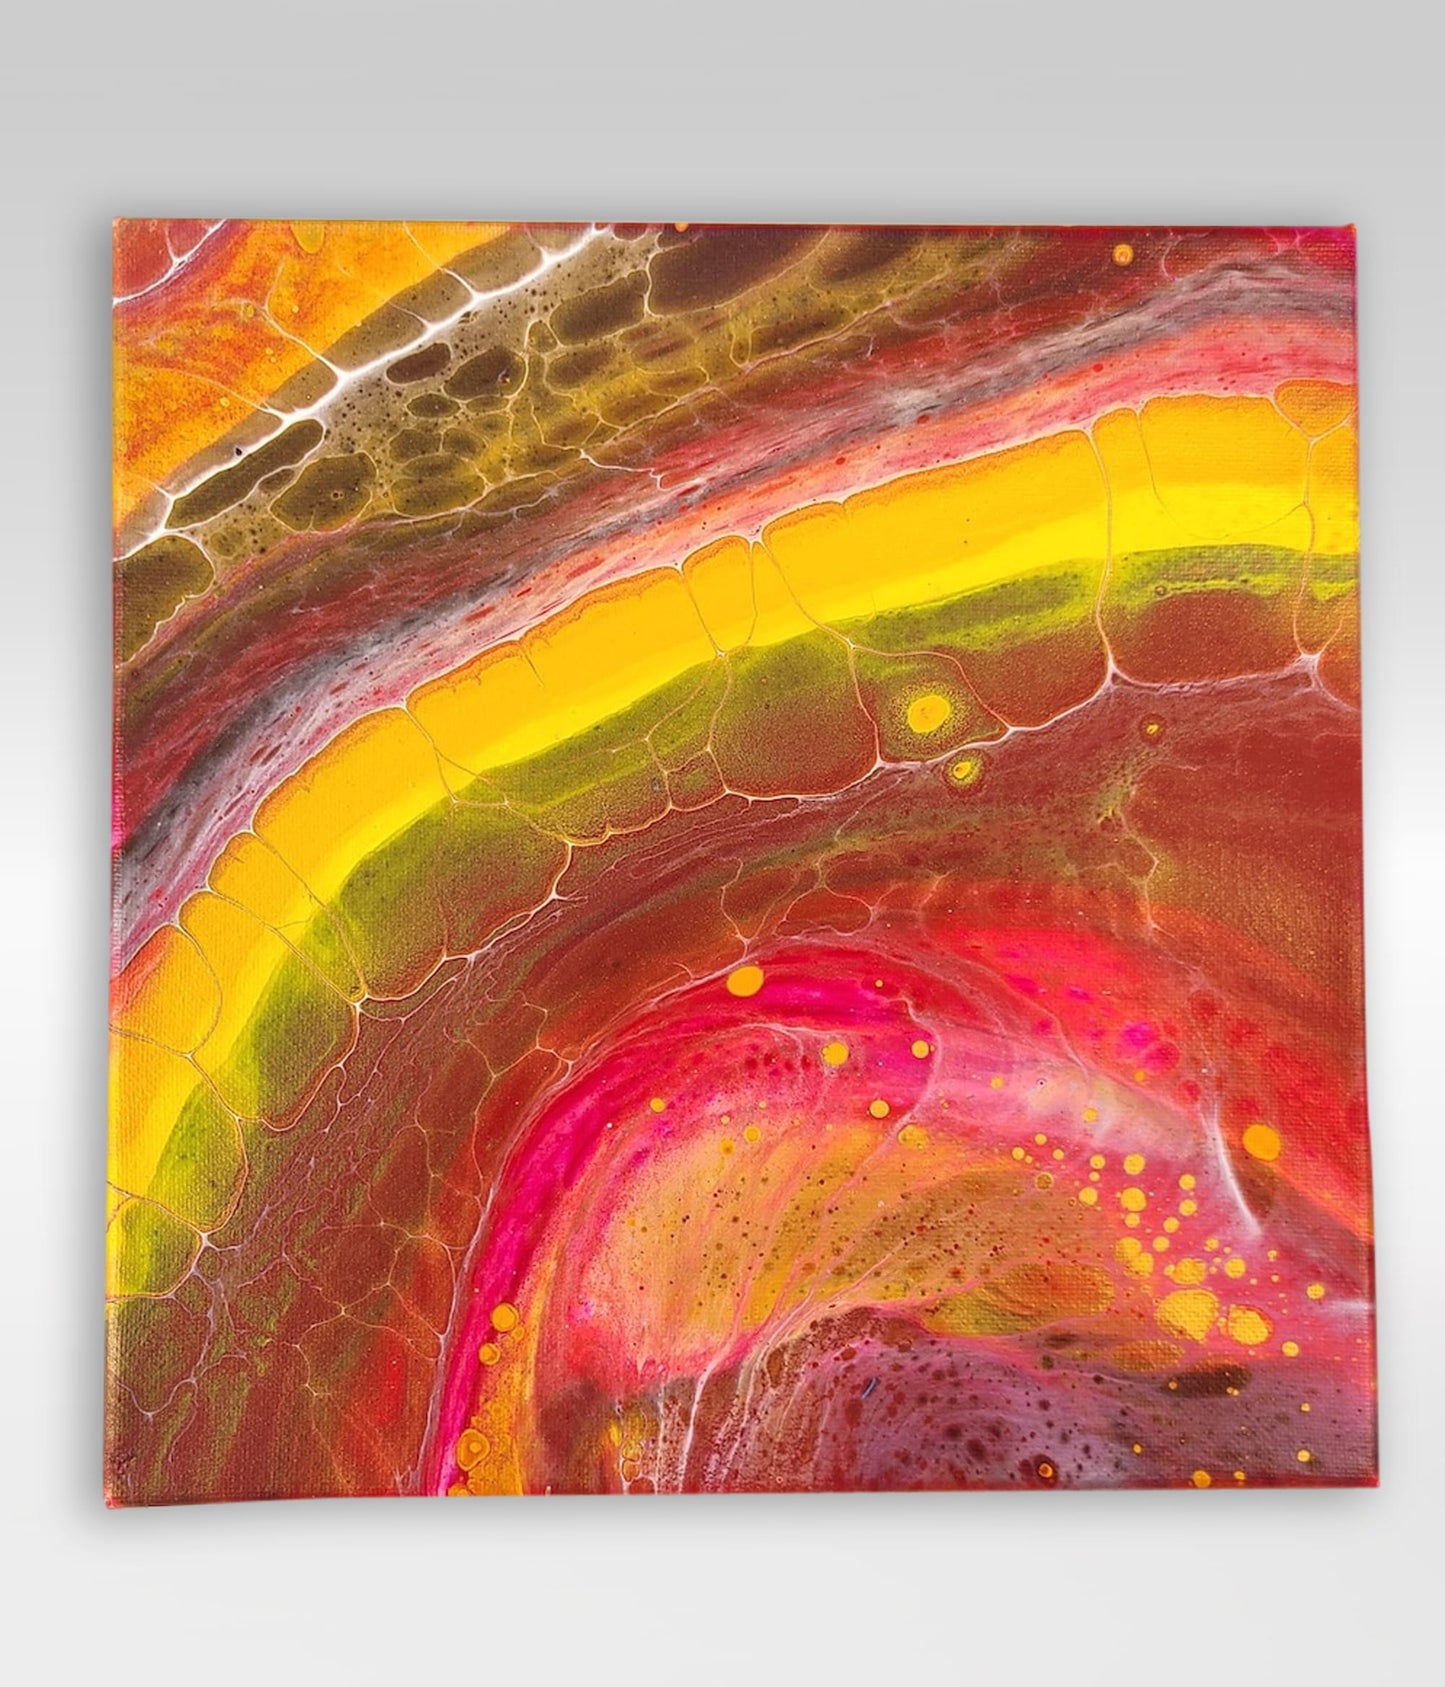 Magma Core – 10 x 10 Acrylic Pour Painting On Canvas